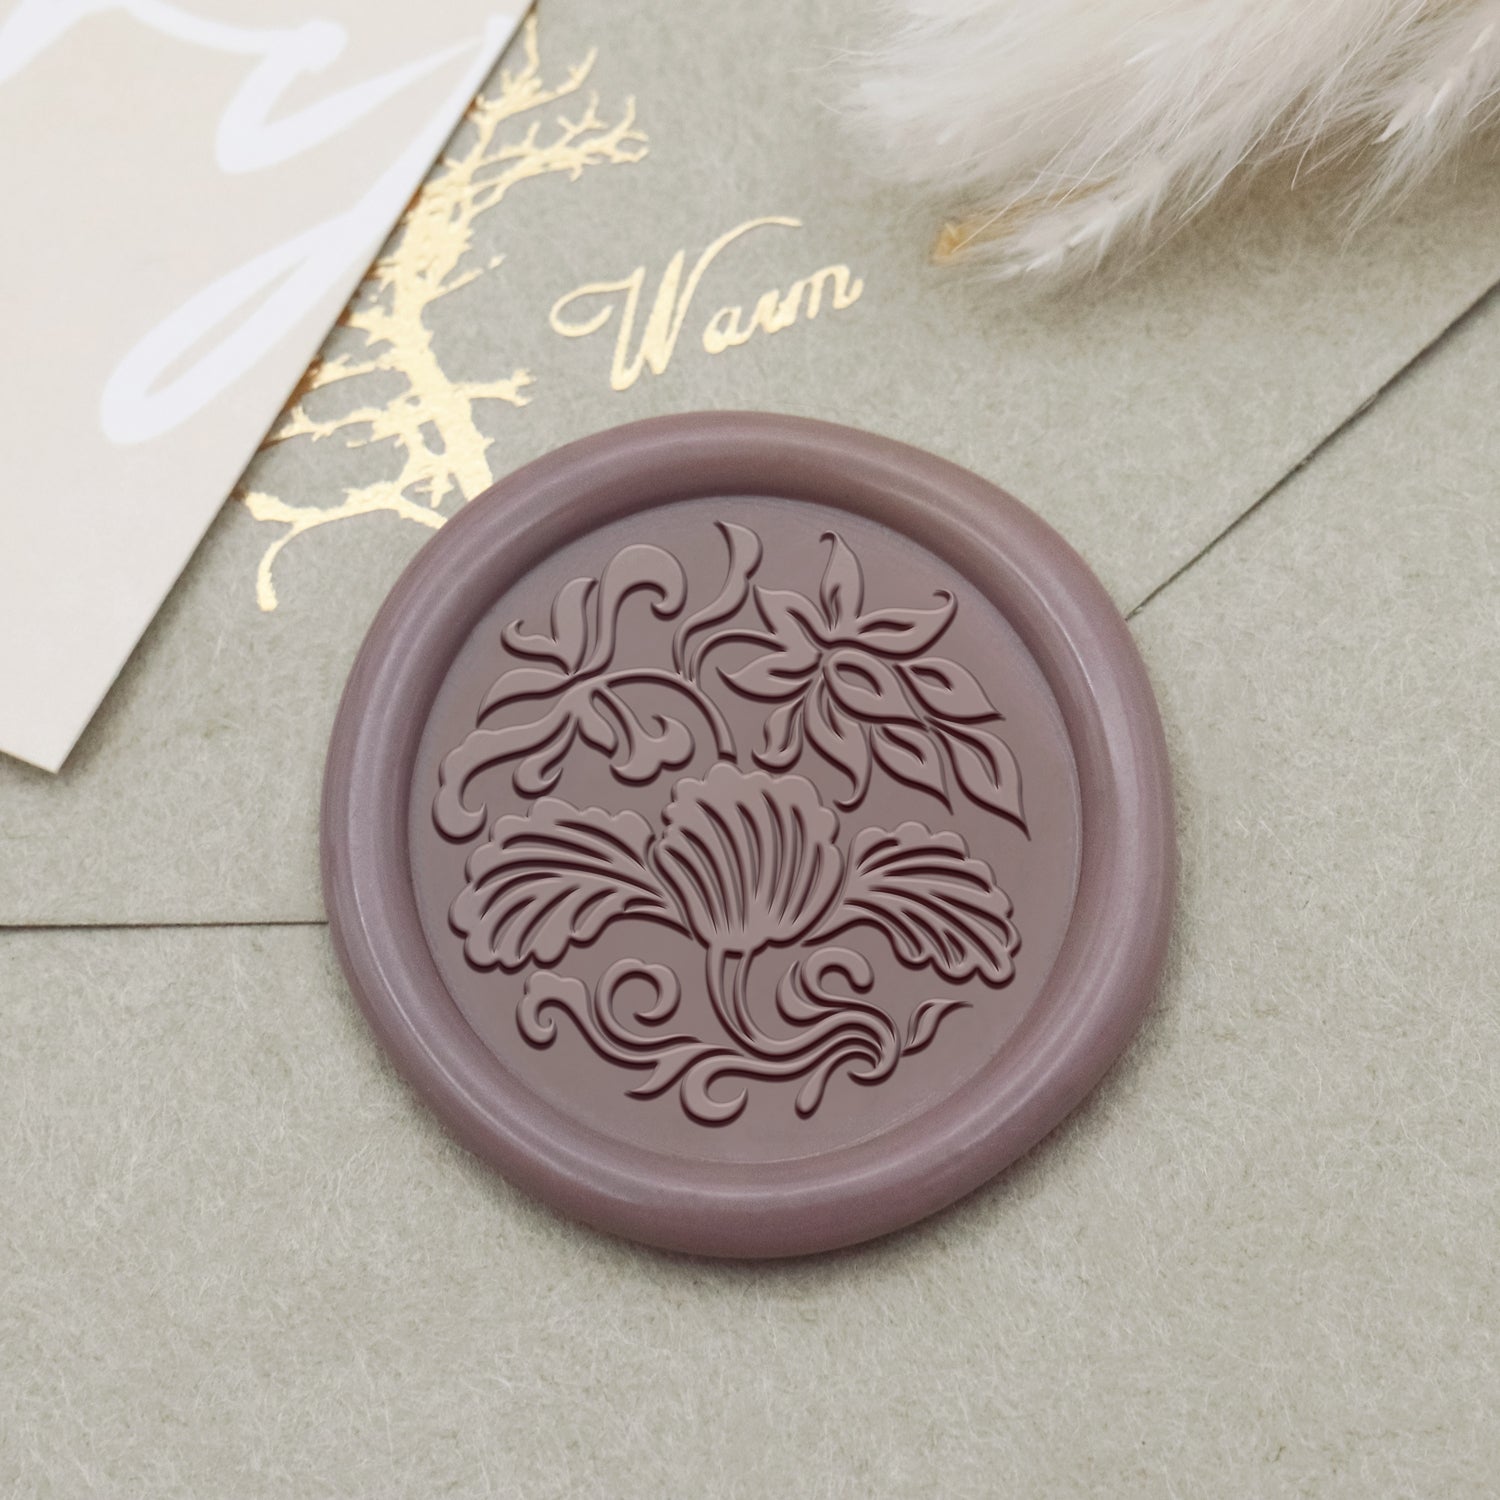 Floral Tile Pattern Wax Seal Stamp - Style 6 1